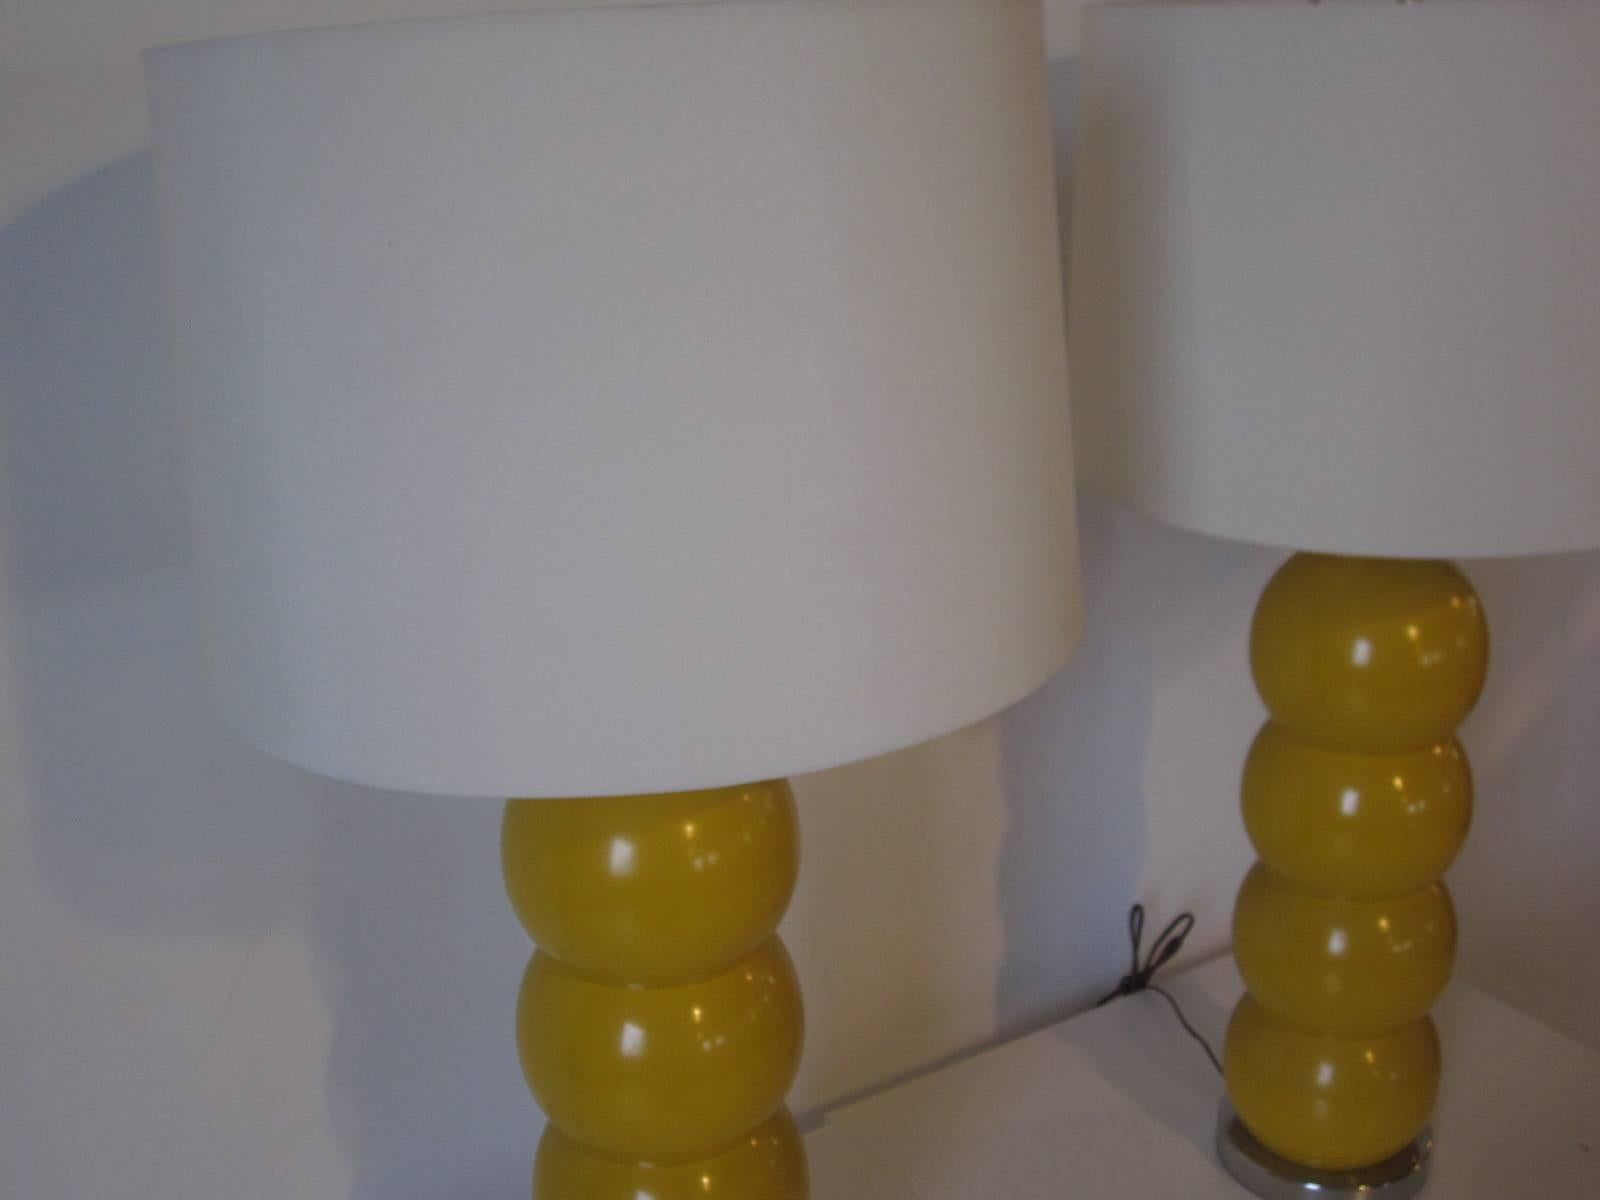 A pair of dark yellow stacking ball table lamps with chrome bases and shafts topped with bone white linen shades, manufactured by the George Kovacs Lighting Company.